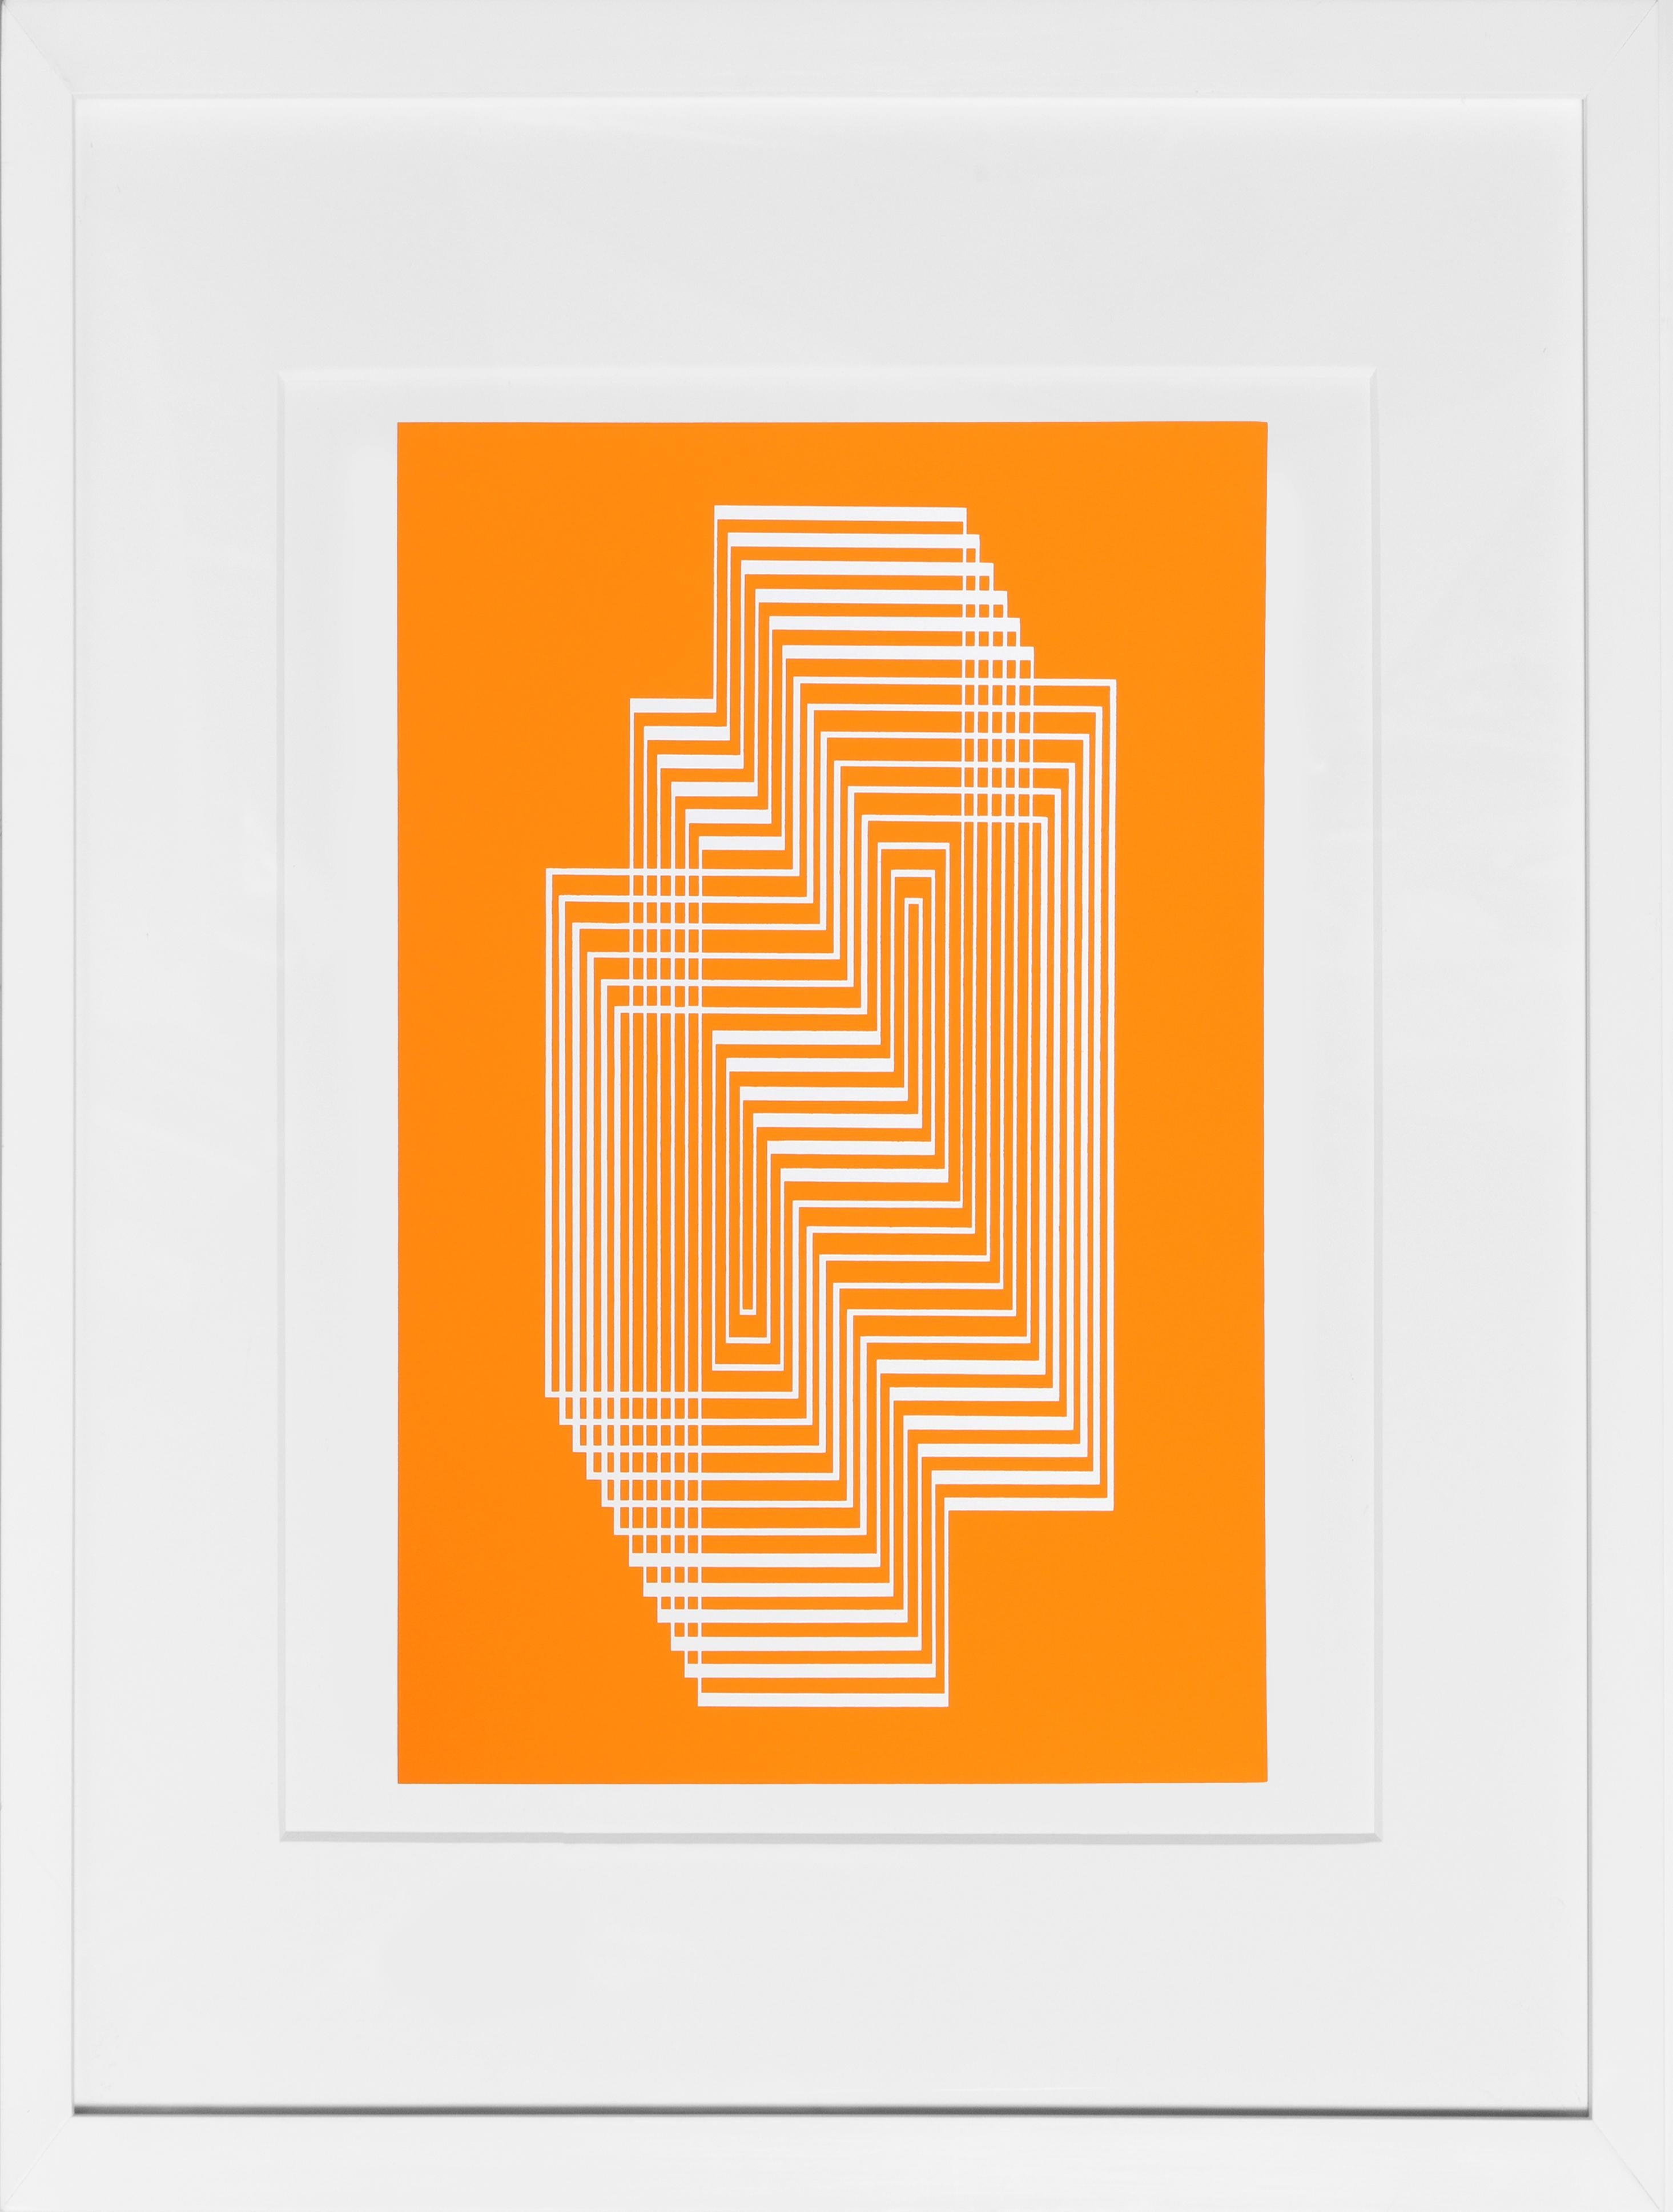 From the portfolio “Formulation: Articulation” created by Josef Albers in 1972. This monumental series consists of 127 original silkscreens that are a definitive survey of the artist's most important color and shape theories.  A copy of the colophon